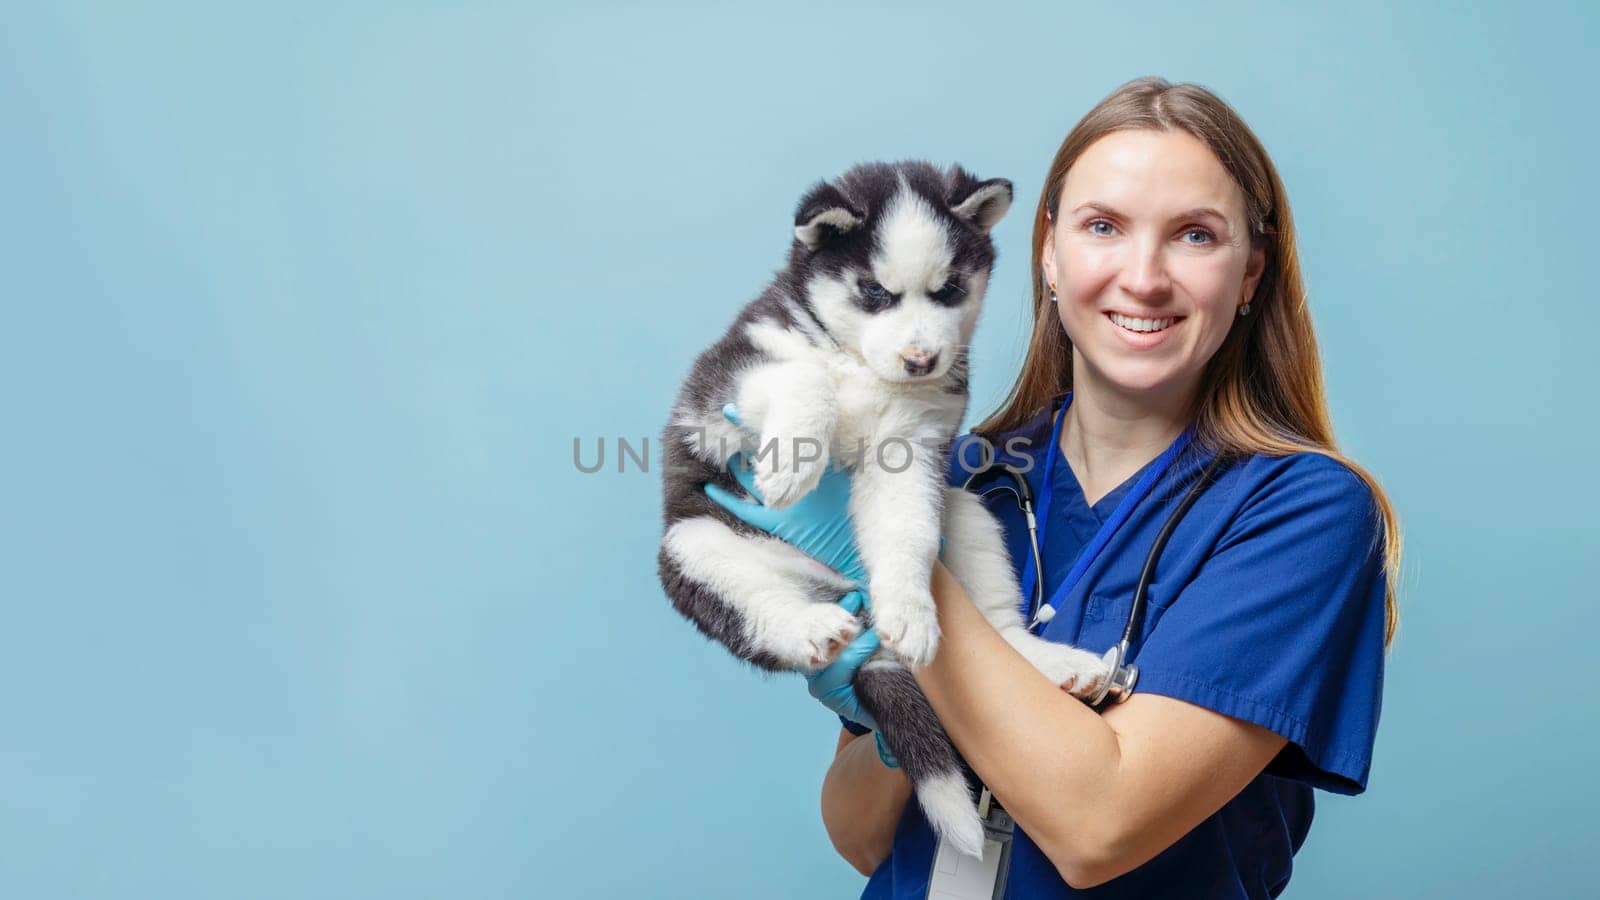 Veterinarian in blue scrubs holding a Siberian Husky puppy against a light blue background. Studio pet portrait with place for text. Veterinary care and pet health concept. Design for banner, poster